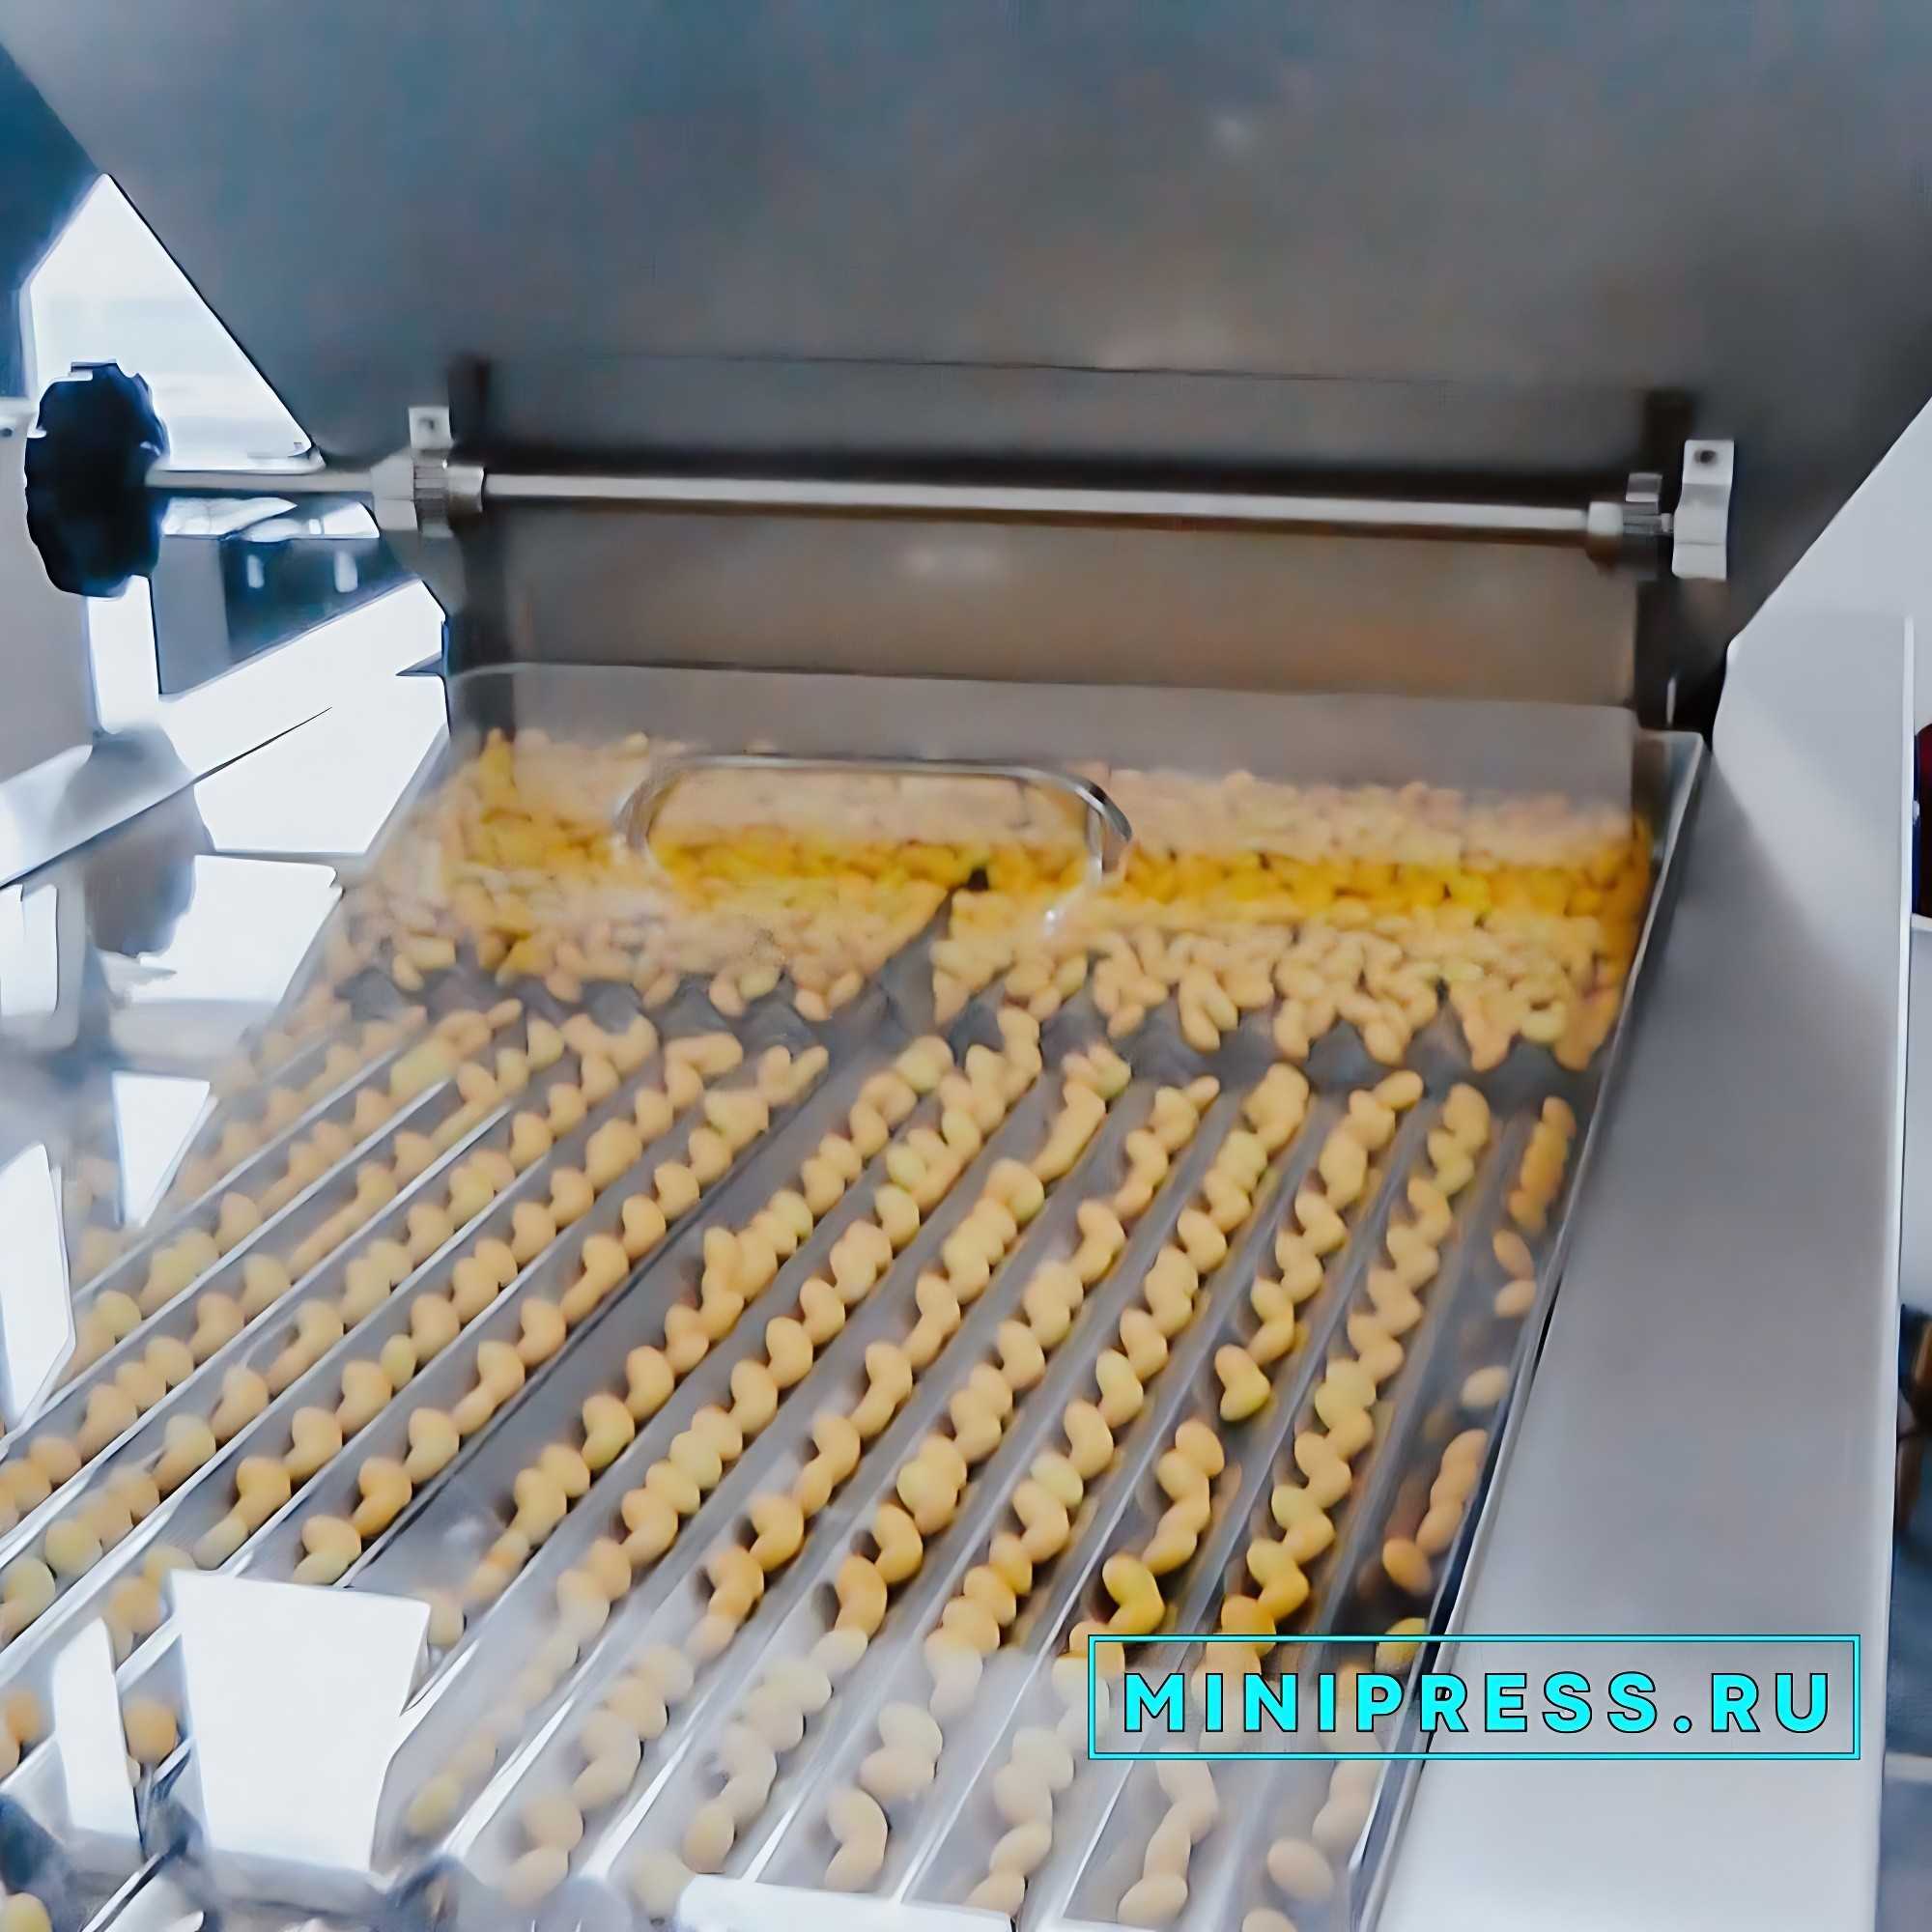 Automatic equipment for dispensing creams and ointments in pharmaceutical production